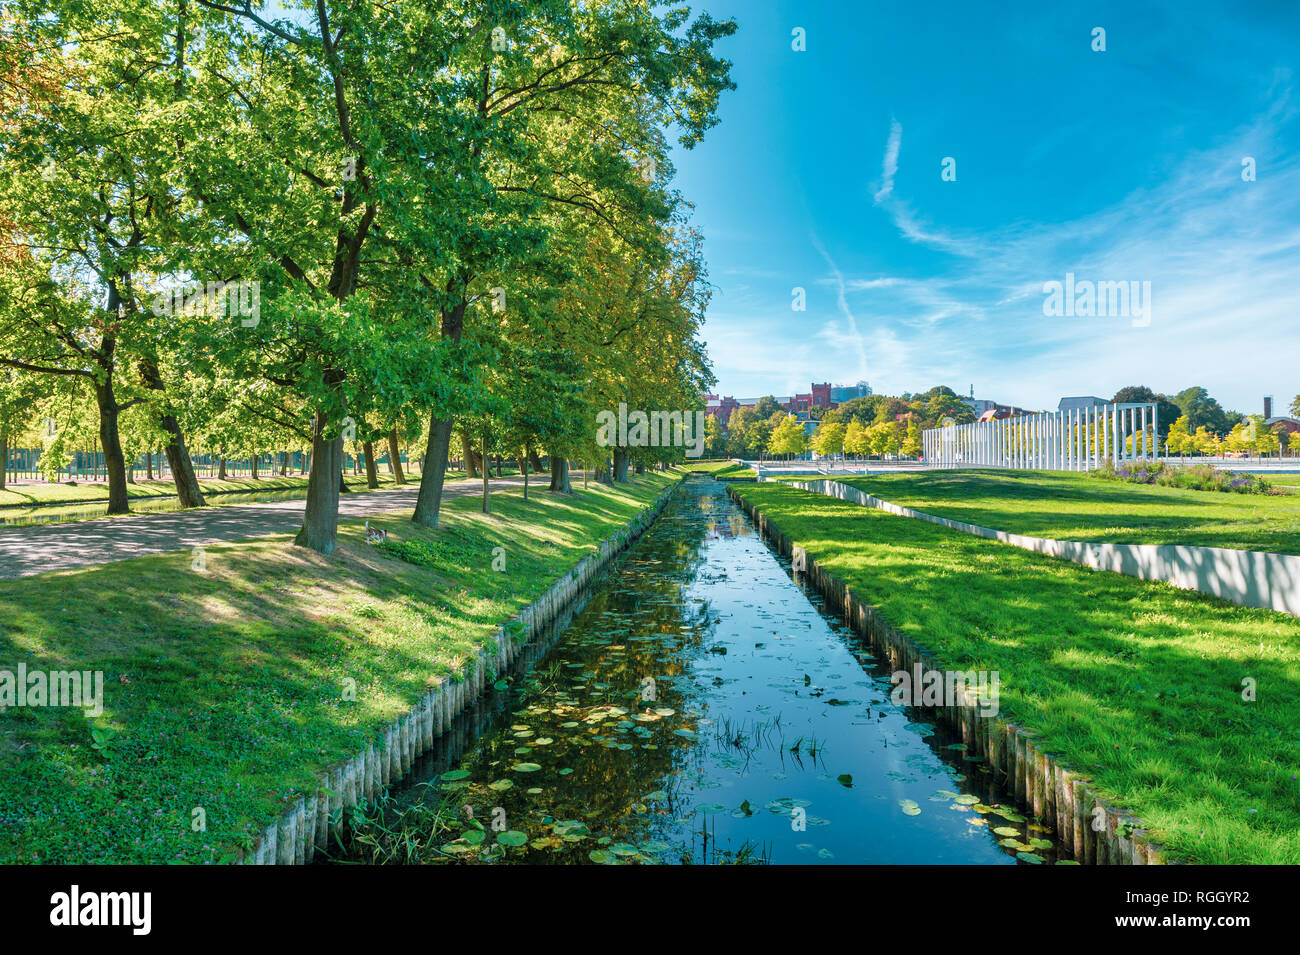 Germany, Mecklenburg-Western Pomerania, Schwerin, Park and 'Schwimmende Wiese' with canal Stock Photo